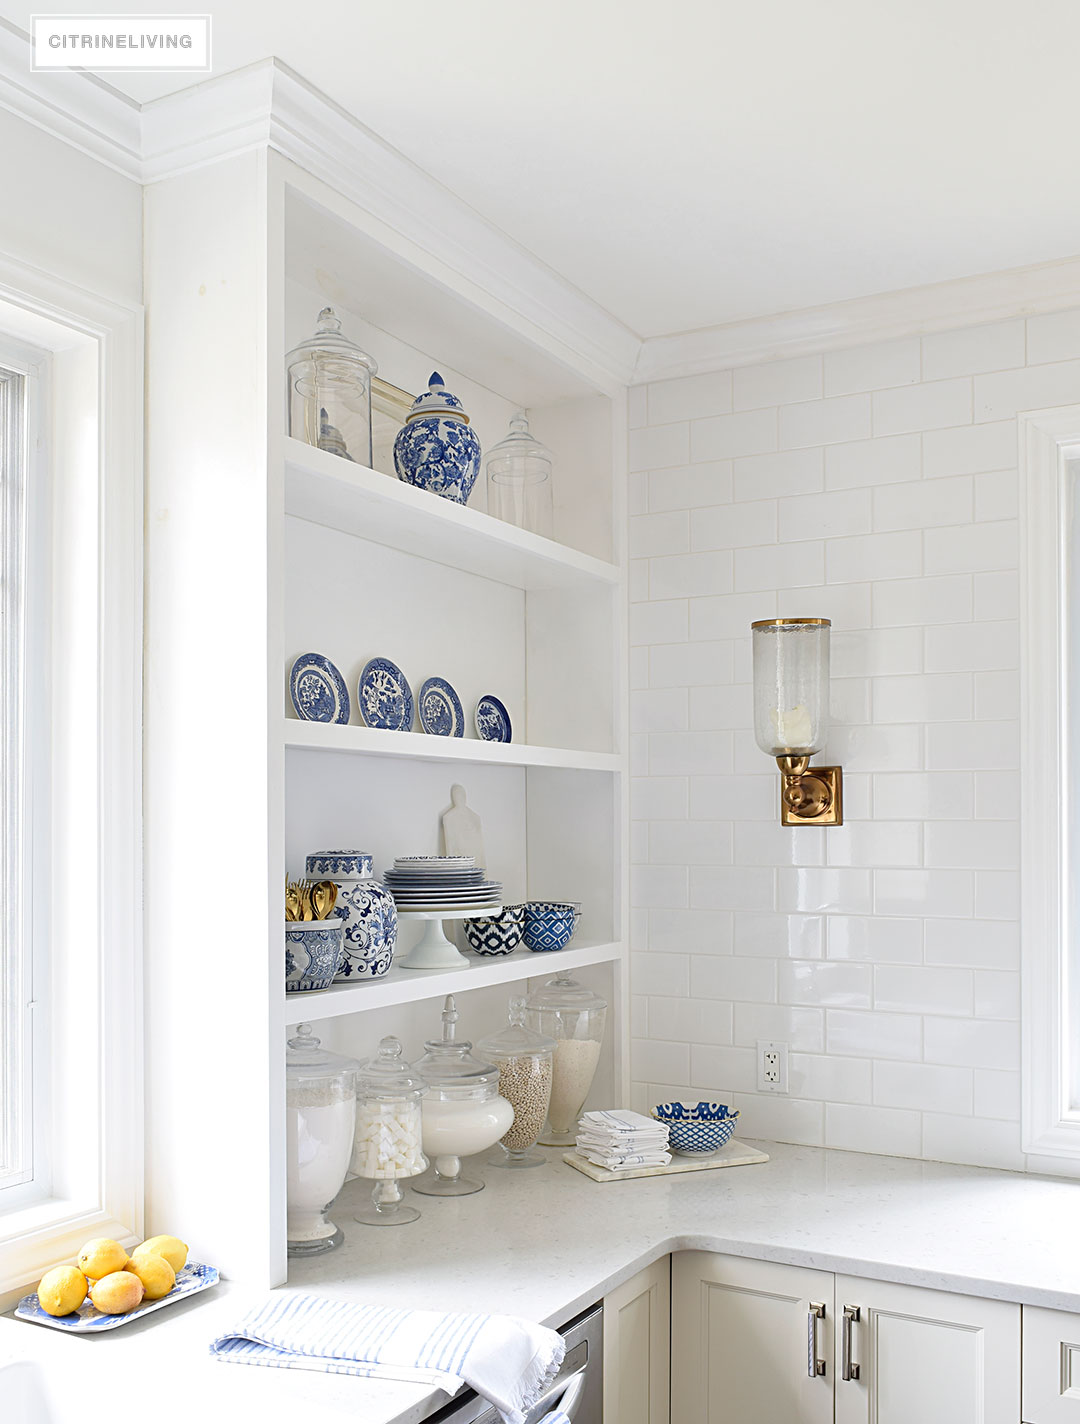 A white kitchen with open shelving is the perfect home for gorgeous blue and white accessories and dishes on display.